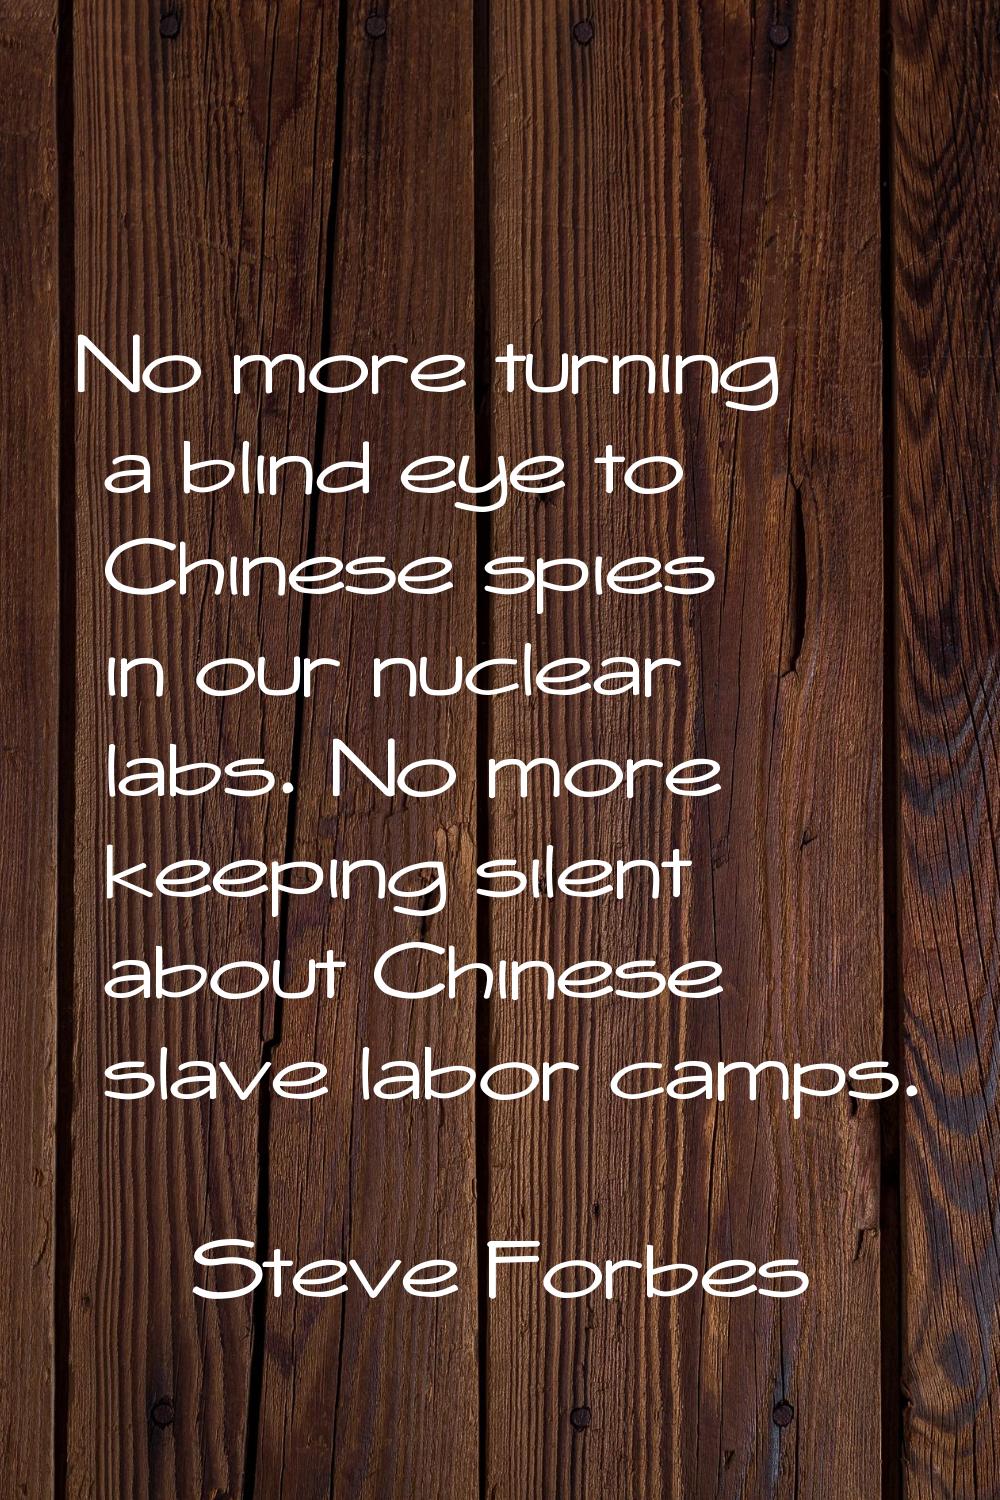 No more turning a blind eye to Chinese spies in our nuclear labs. No more keeping silent about Chin